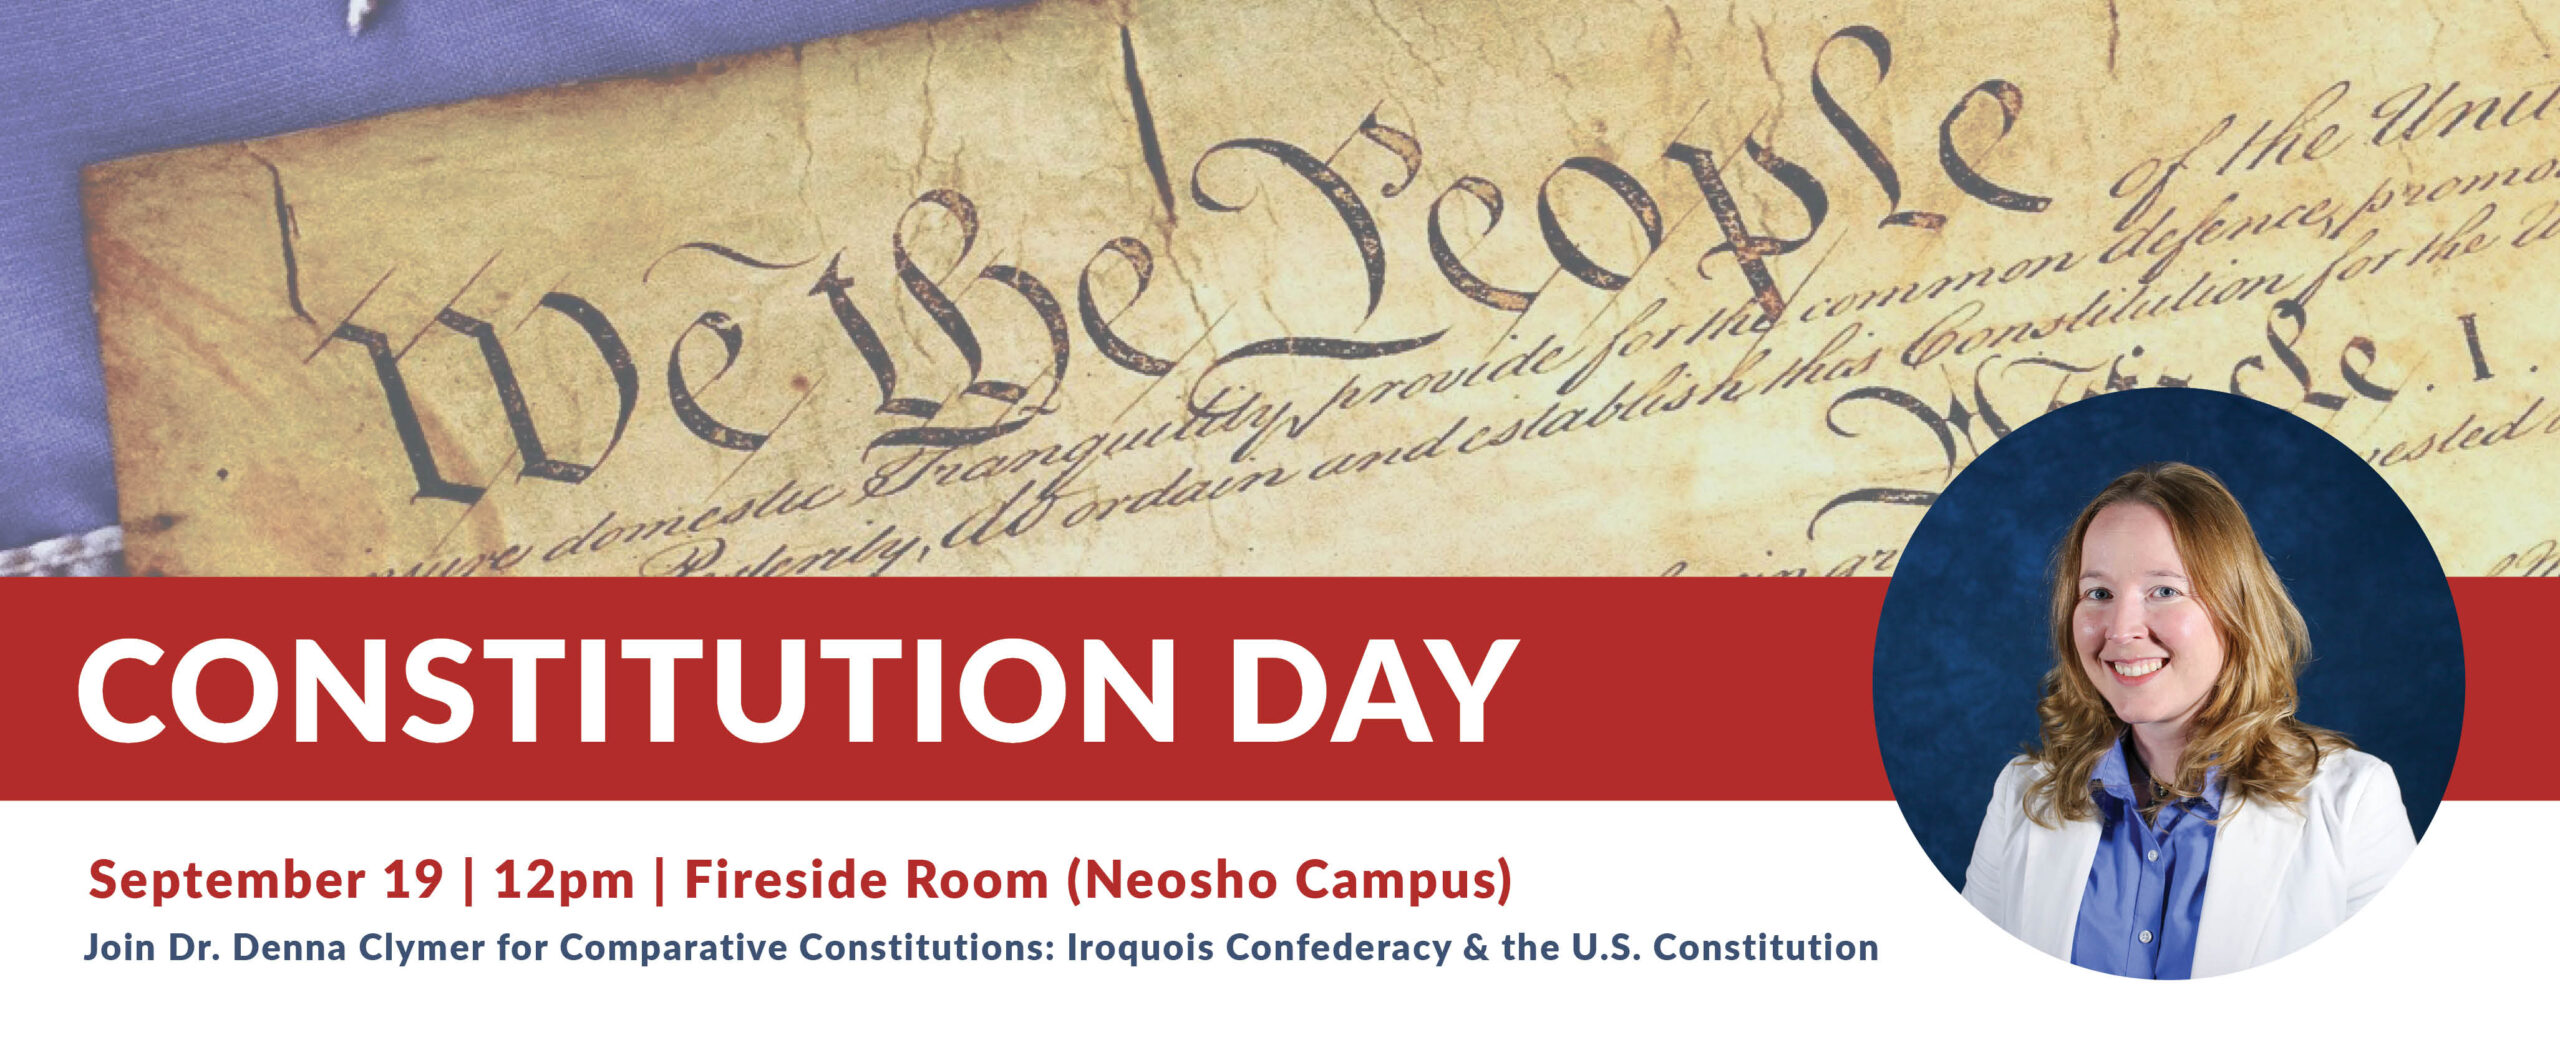 Constitution Day 2022 - September 19, 12pm, Fireside Room. Join Dr. Denna Clymer for Comparative Constitutions